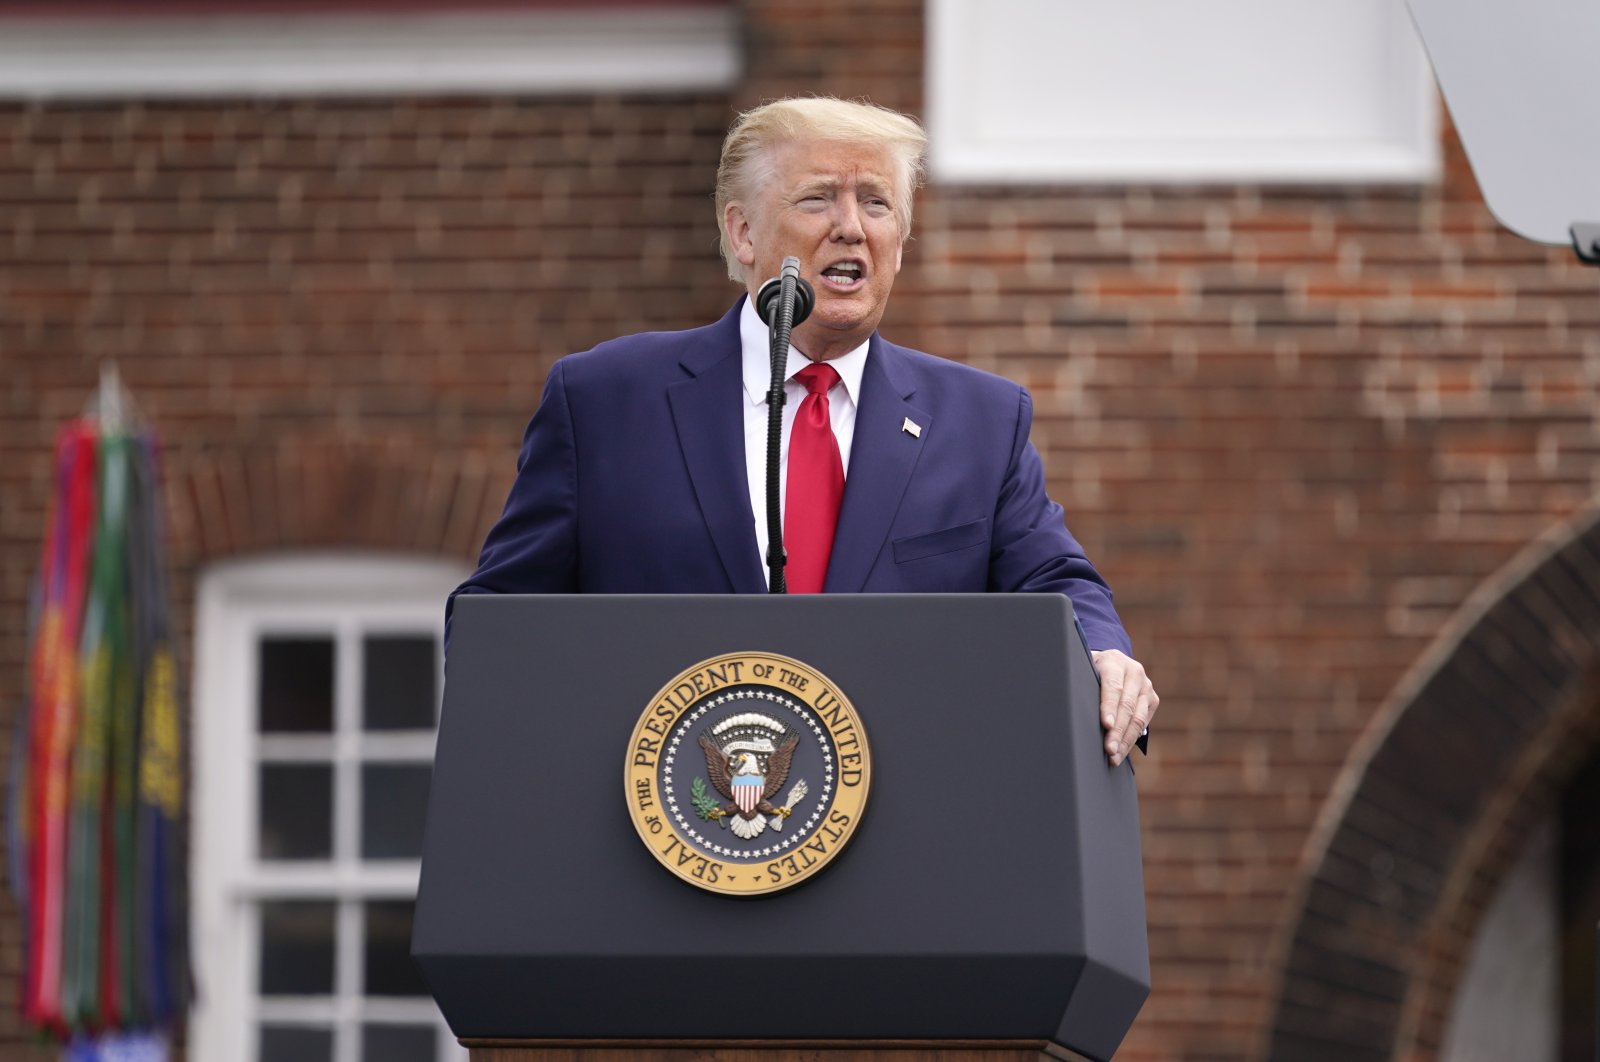 President Donald Trump speaks during a Memorial Day ceremony at Fort McHenry National Monument and Historic Shrine, Baltimore, Maryland, May 25, 2020. (AP Photo)